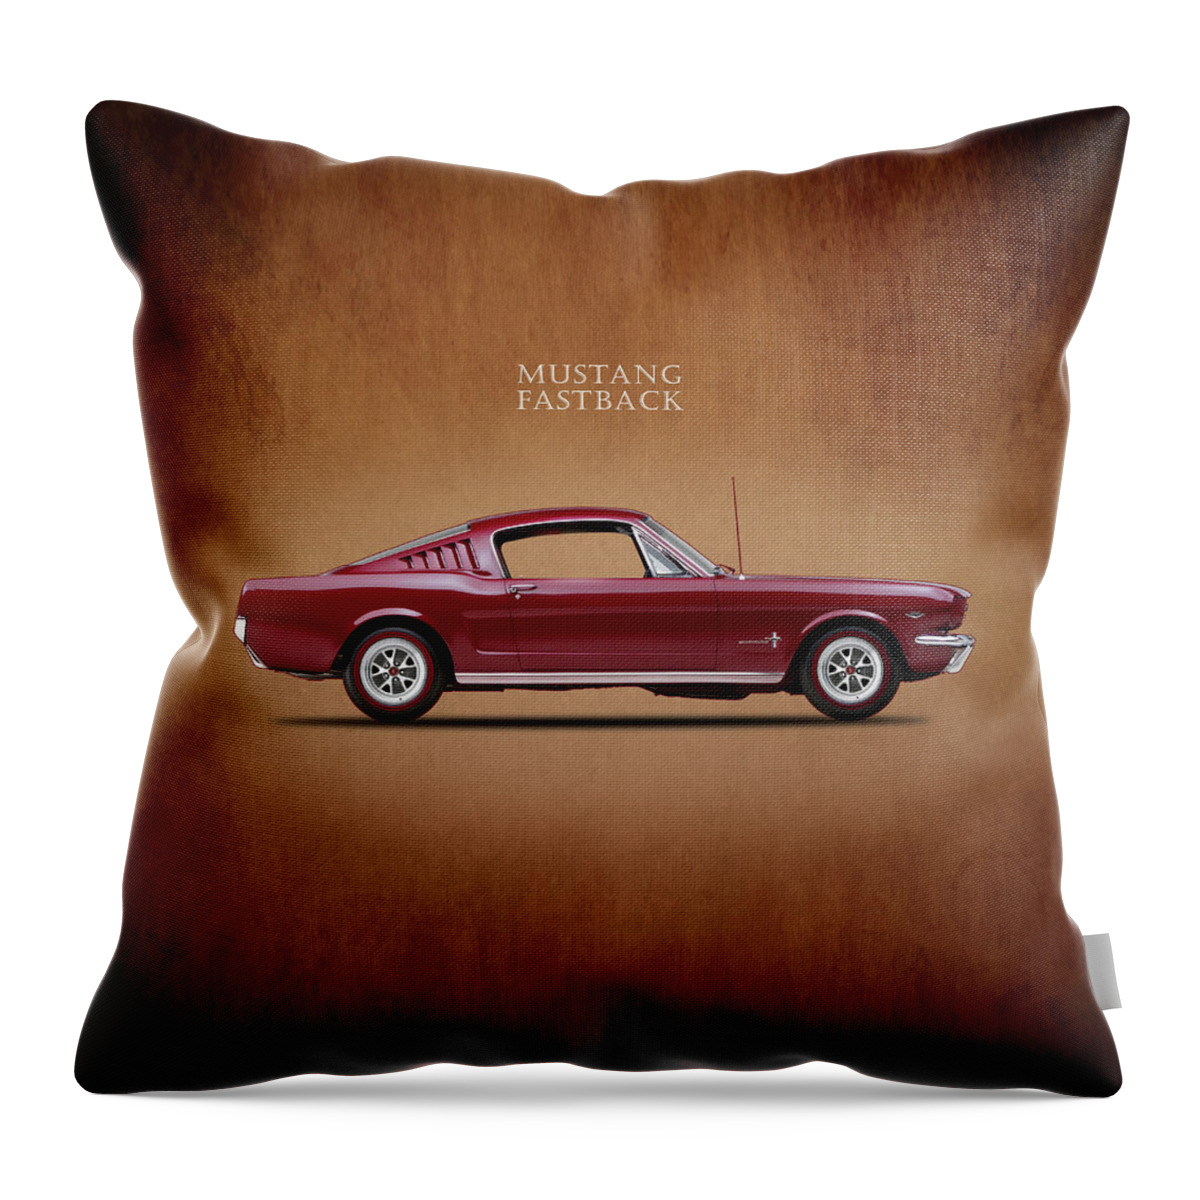 Ford Mustang Fastback 1965 Throw Pillow featuring the photograph Ford Mustang Fastback 1965 by Mark Rogan